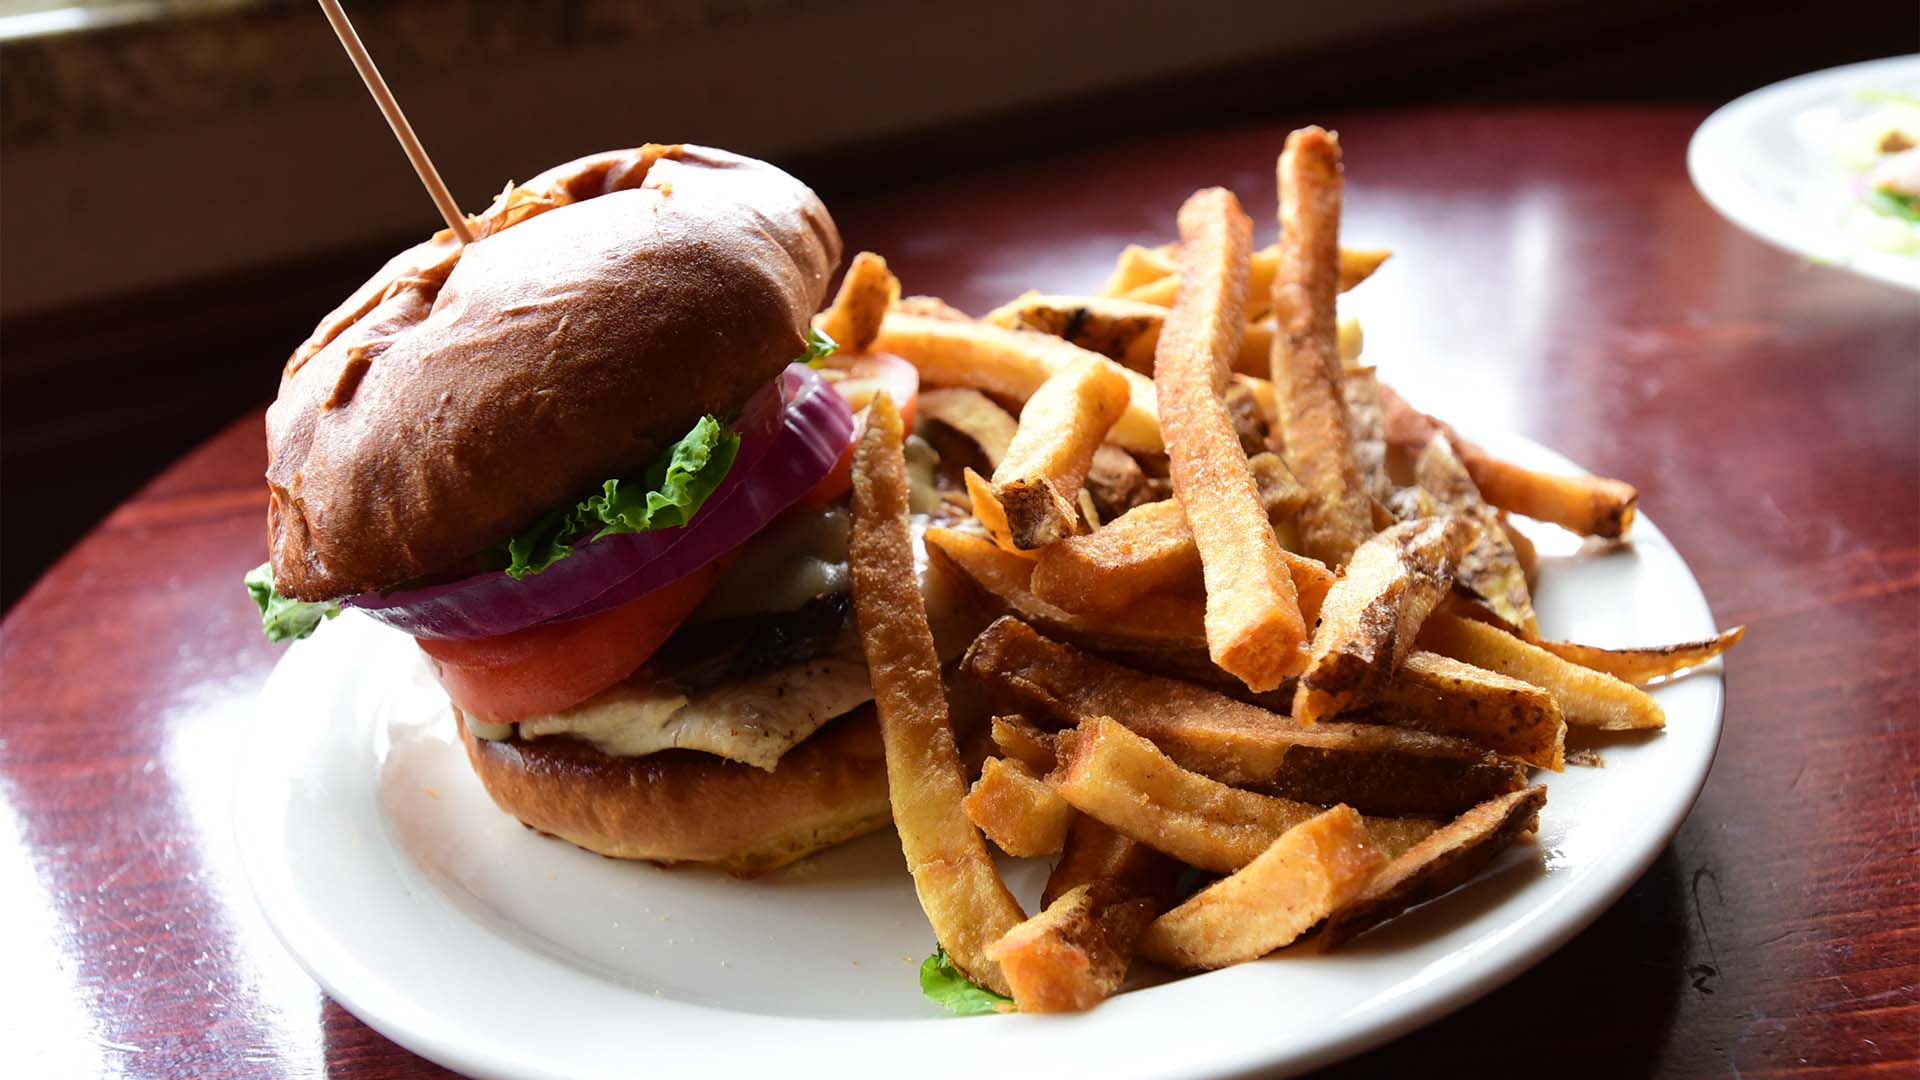 Find the best restaurants for every meal in Marshfield | Cheeseburger at Blue Heron Brewpub Marshfield WI